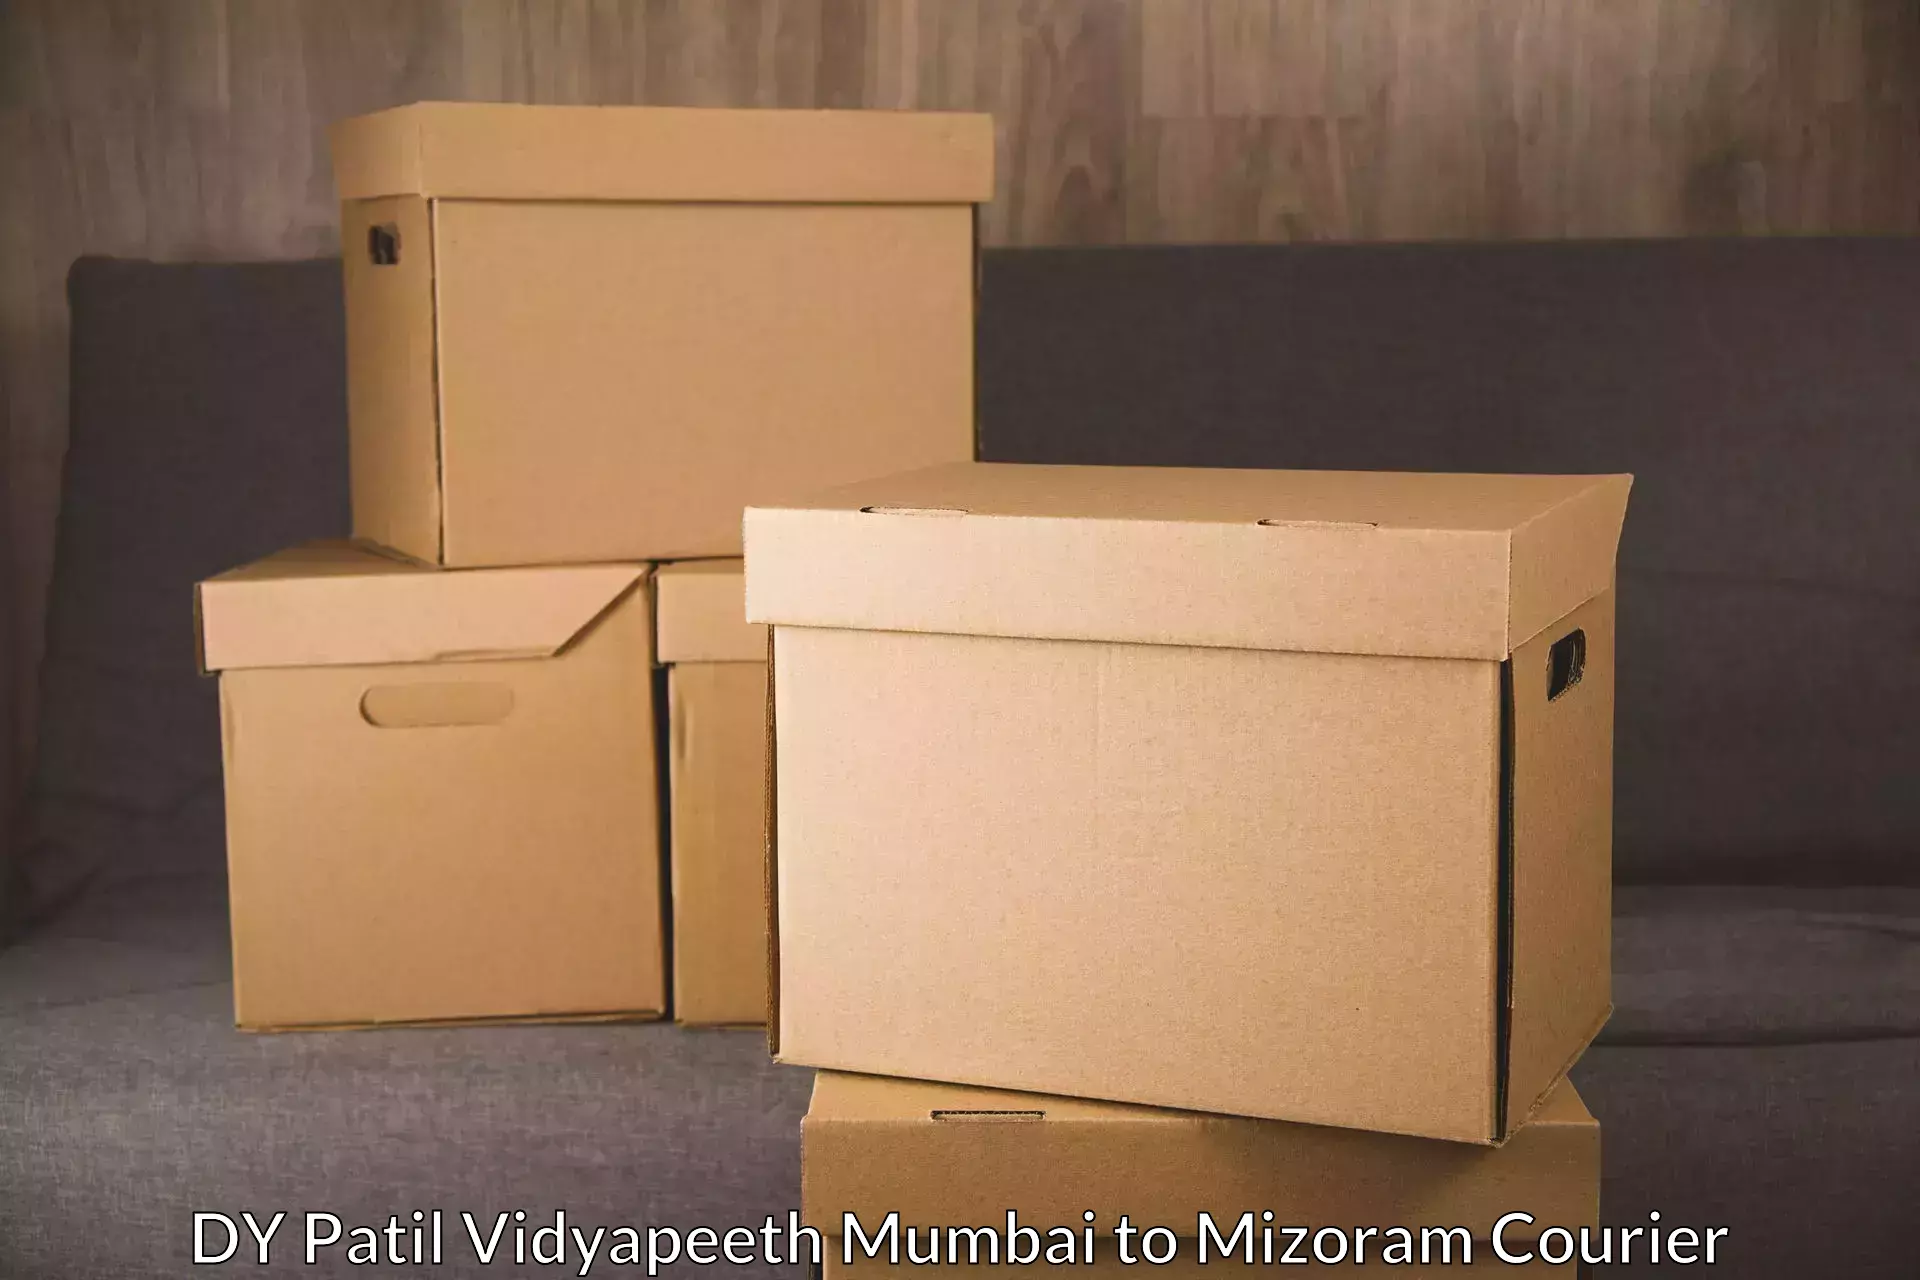 Fast-track shipping solutions in DY Patil Vidyapeeth Mumbai to Aizawl